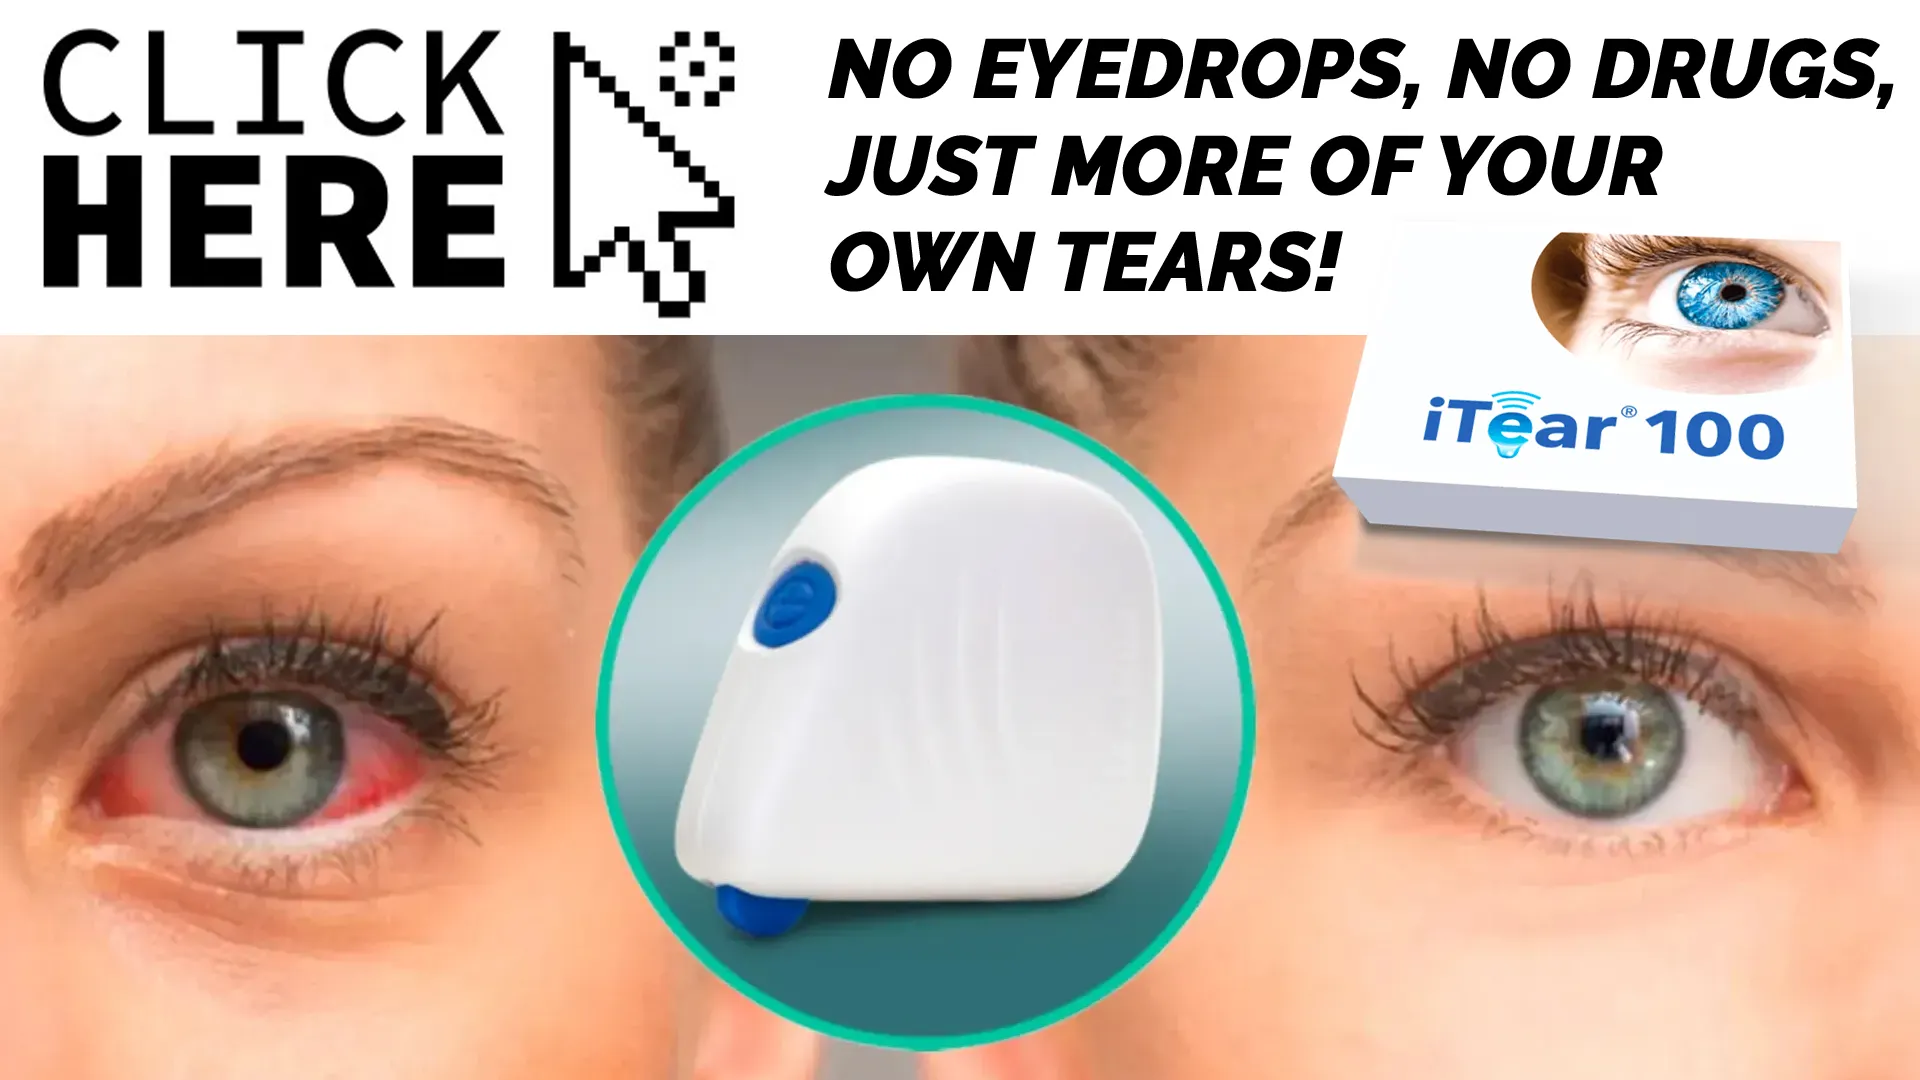  iTEAR100: A Technological Breakthrough in Dry Eye Management 